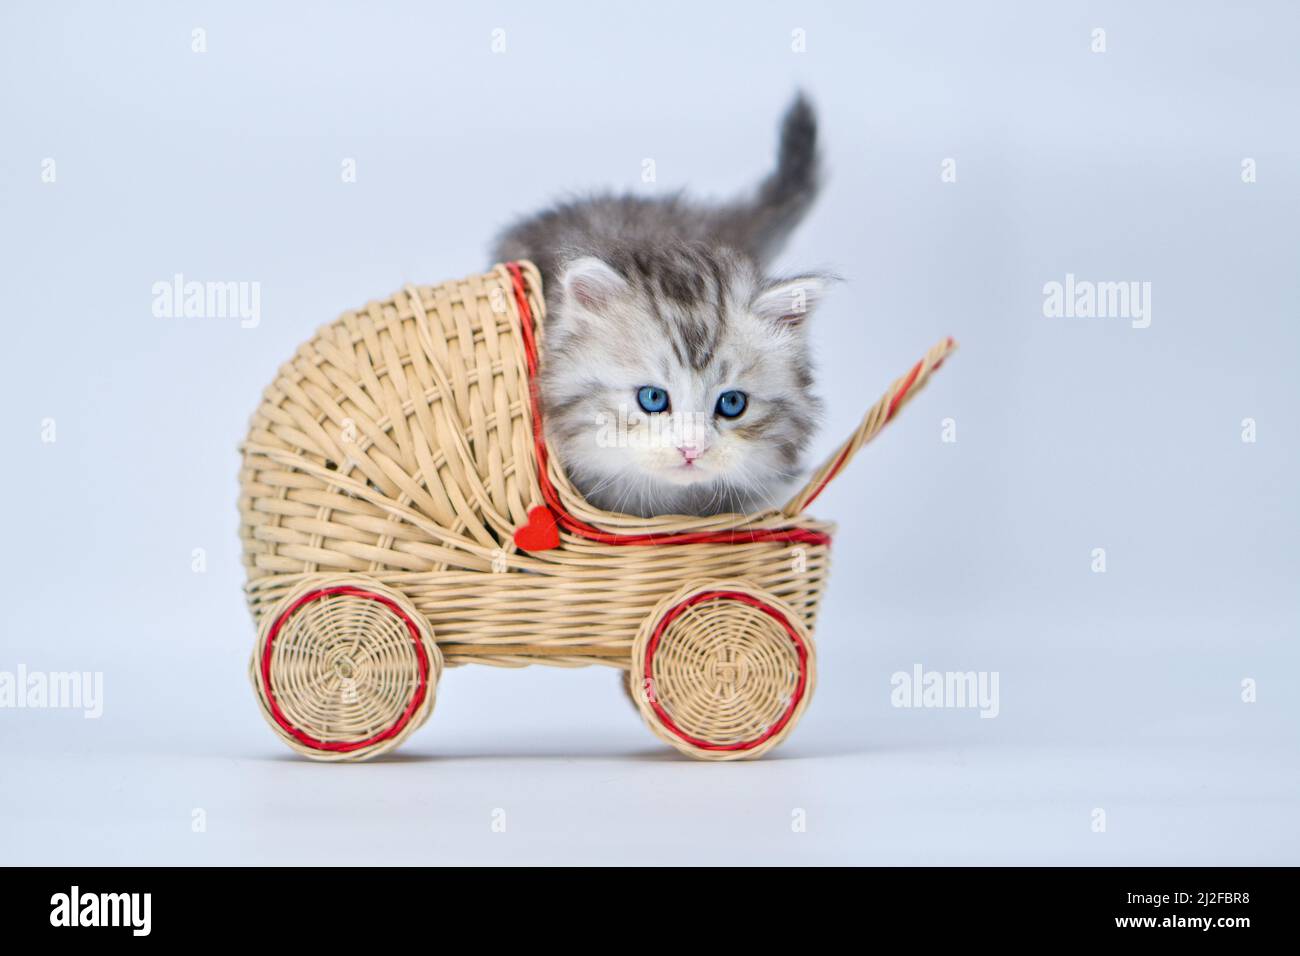 Siberian kitten on a colored background with a stroller Stock Photo